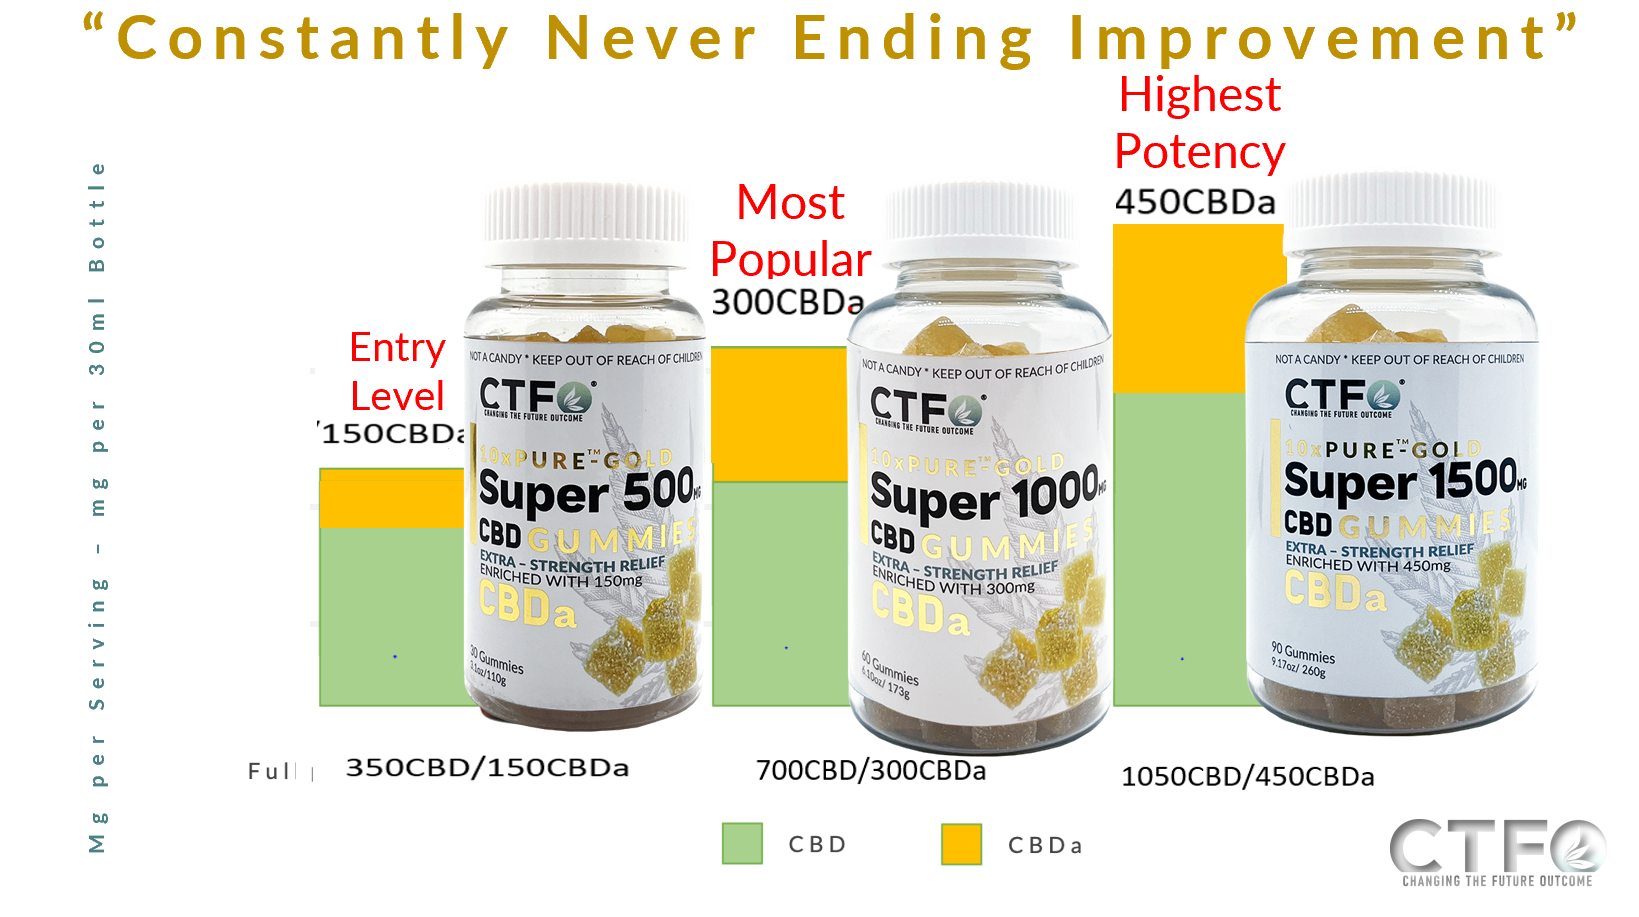 Shows the bottle of our new 10xpure Gold Super CBD + CBDa Gummies plus info on how much CBD and CBDa comes in each bottle.